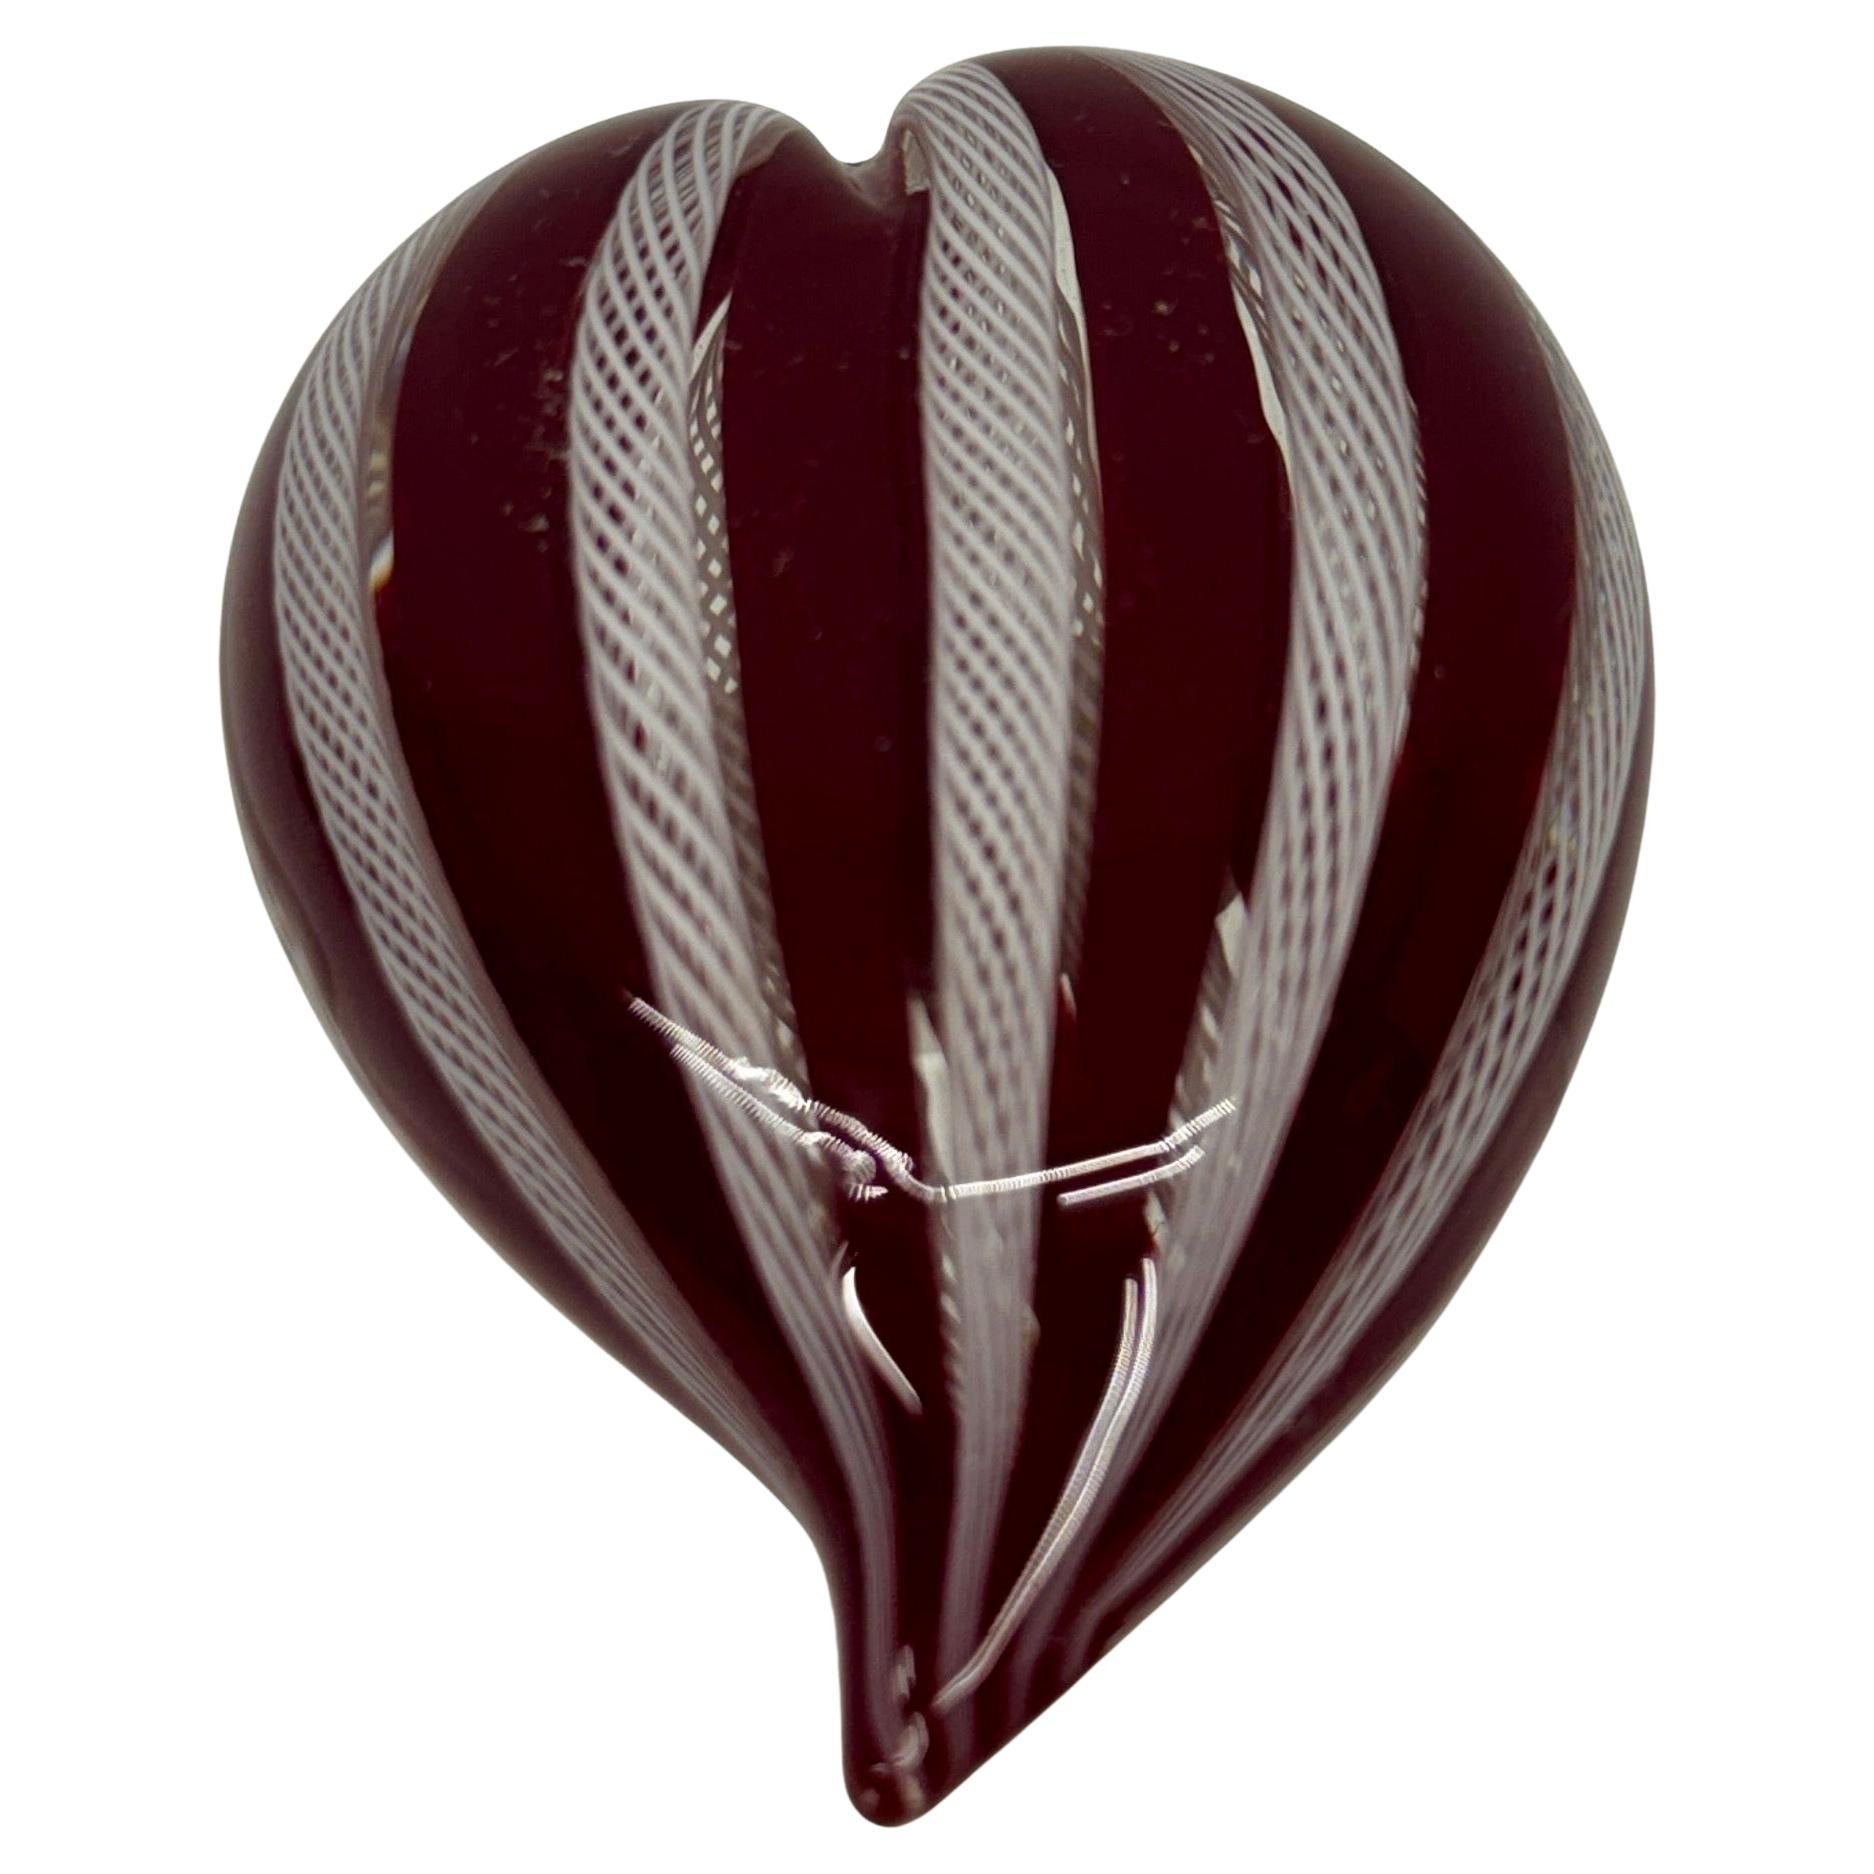 Small Murano Red and White Heart Shaped Paper Weight, Italy circa 1960's